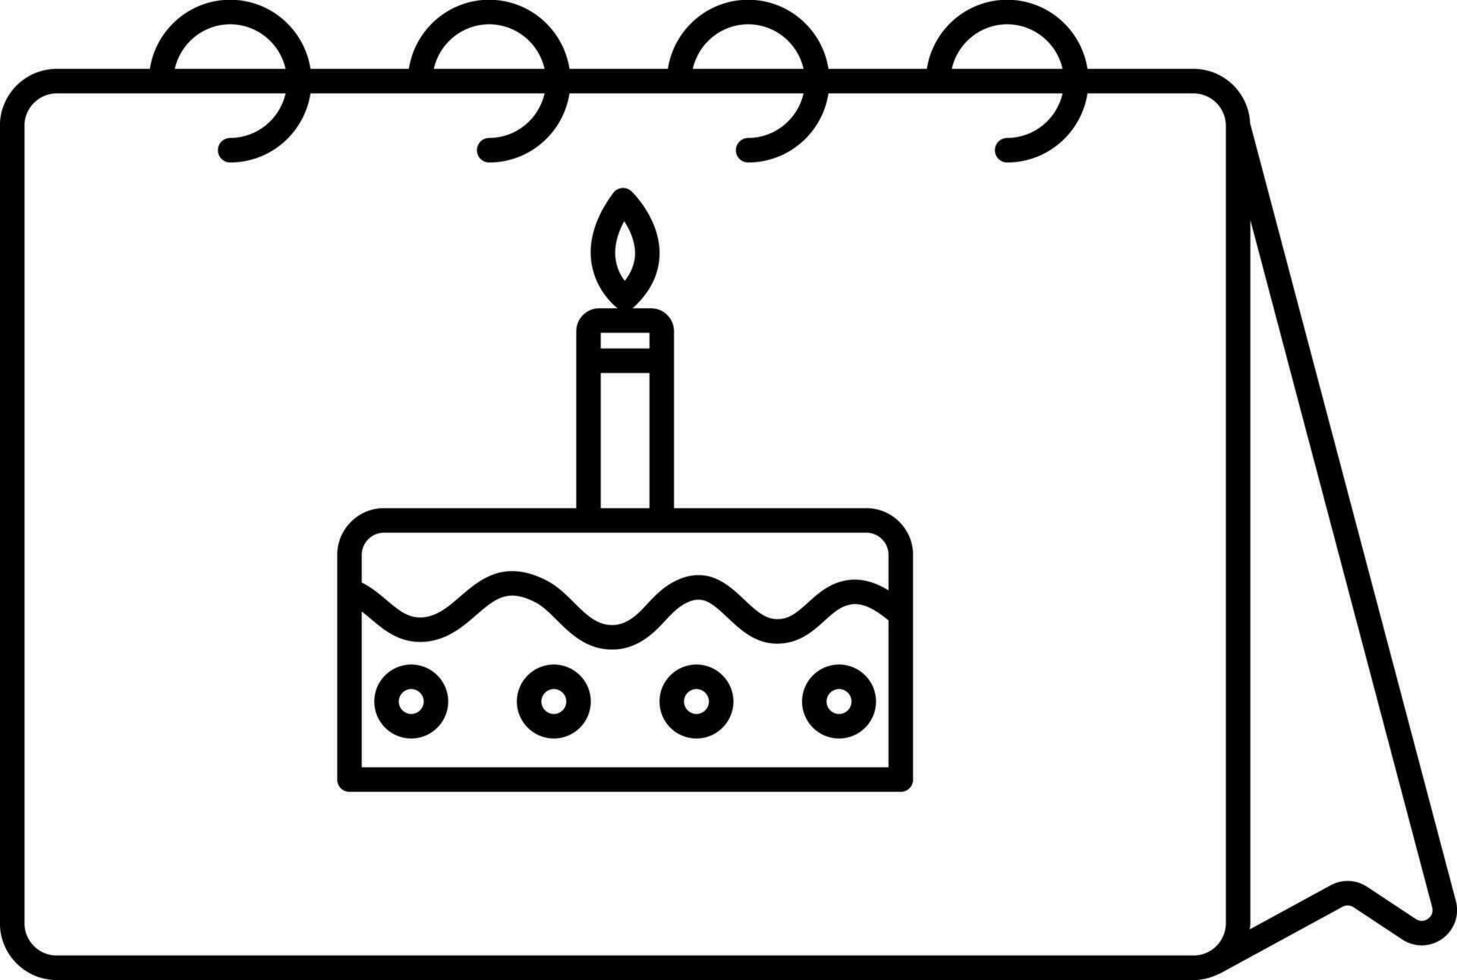 Burning Candle Cake With Calendar Icon In Line Art. vector